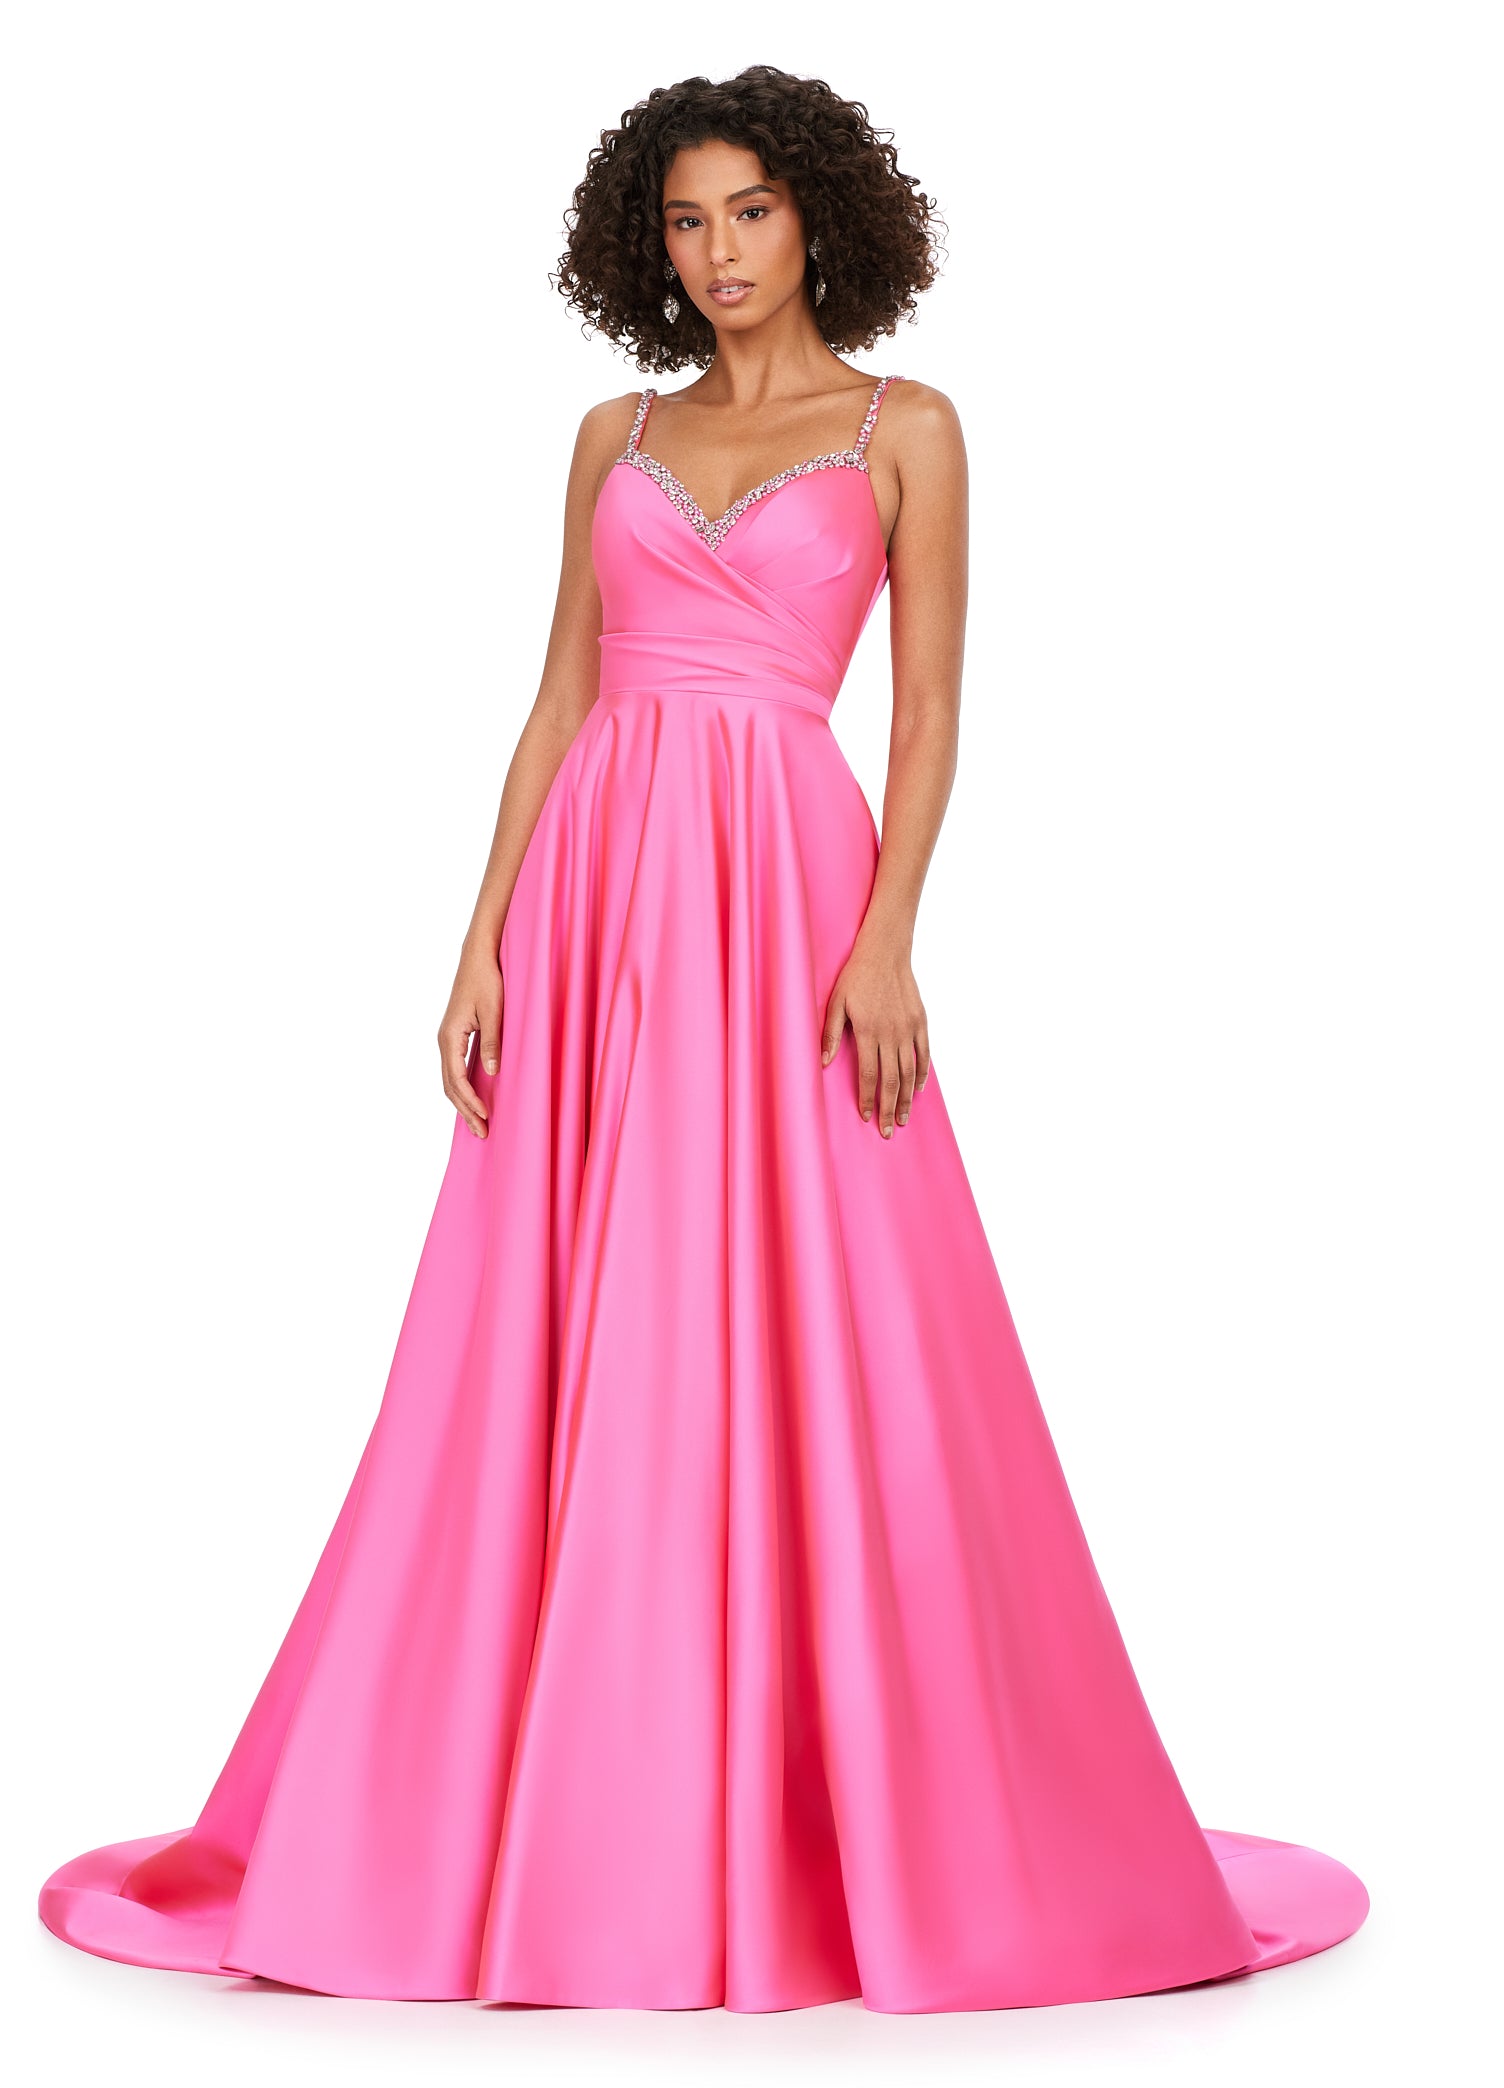 Ashley Lauren 11267 Spaghetti Strap Heavy Satin Crystal Beading Bustier A-Line Ballgown Formal Dress. Turn heads in this beautiful A-line gown, featuring spaghetti straps and eye catching crystal beading. The bustier is complete with asymmetrical ruching to perfectly accentuate your curves.